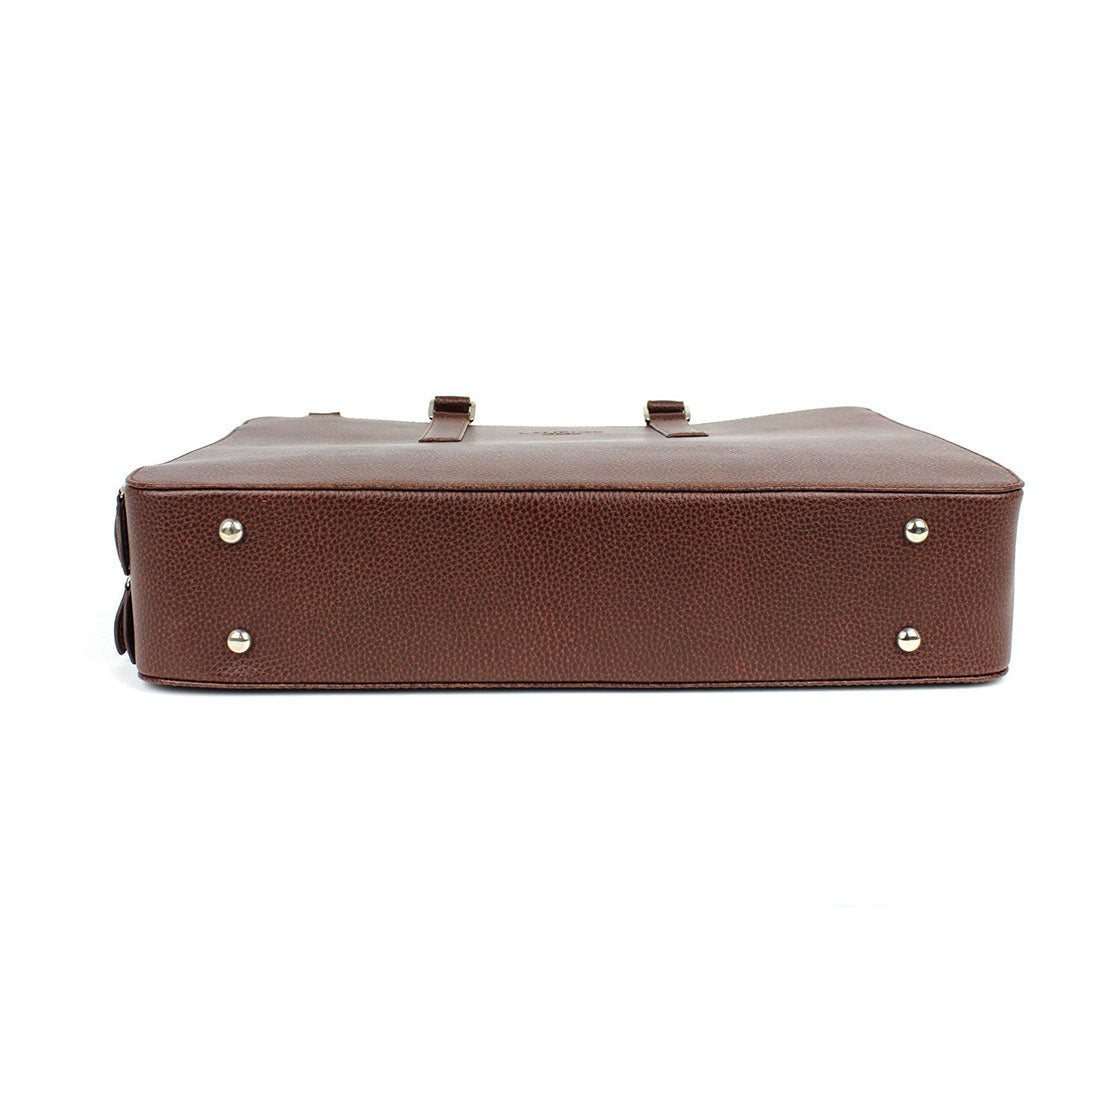 Deluxe Laptop Briefcase - Brown#color_laurige-brown